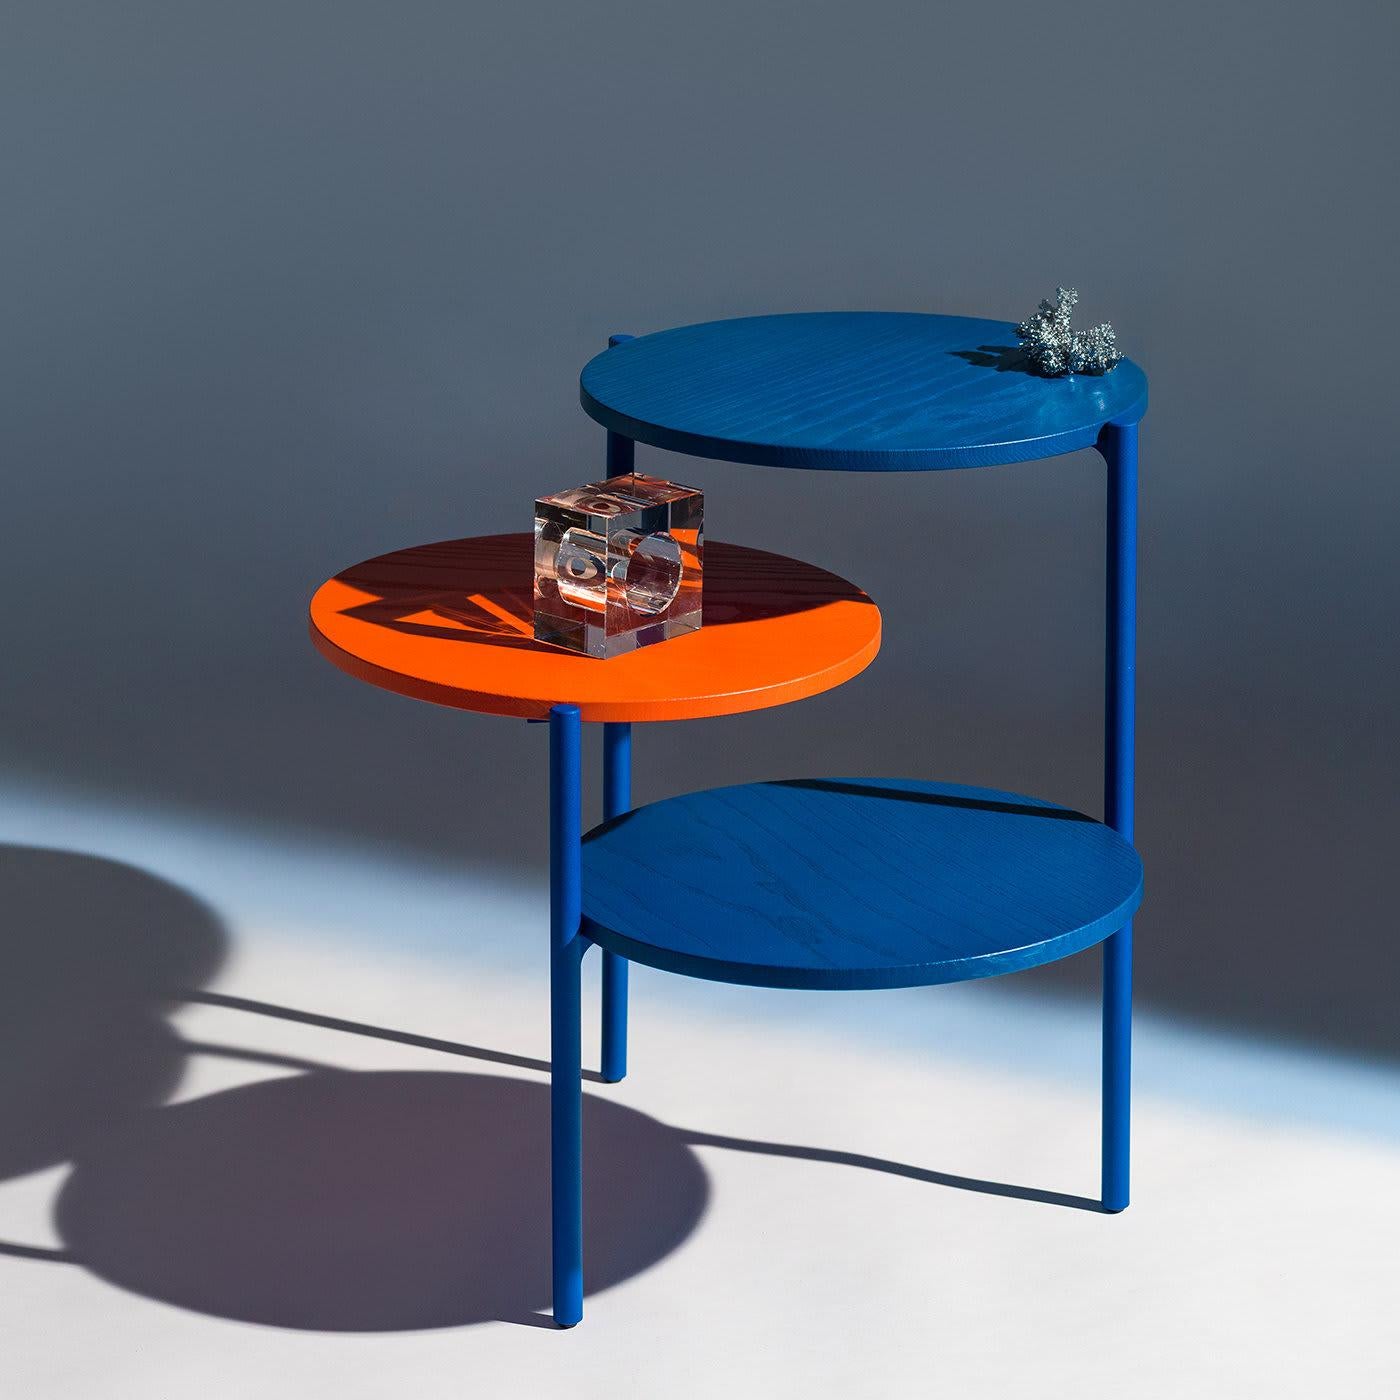 For style and functionality, the Triplo triple table is the perfect complimenting accessory to your favorite living space. With colored table tops crafted from solid wood and a support frame in blue metal, this accessory offers a compact way to